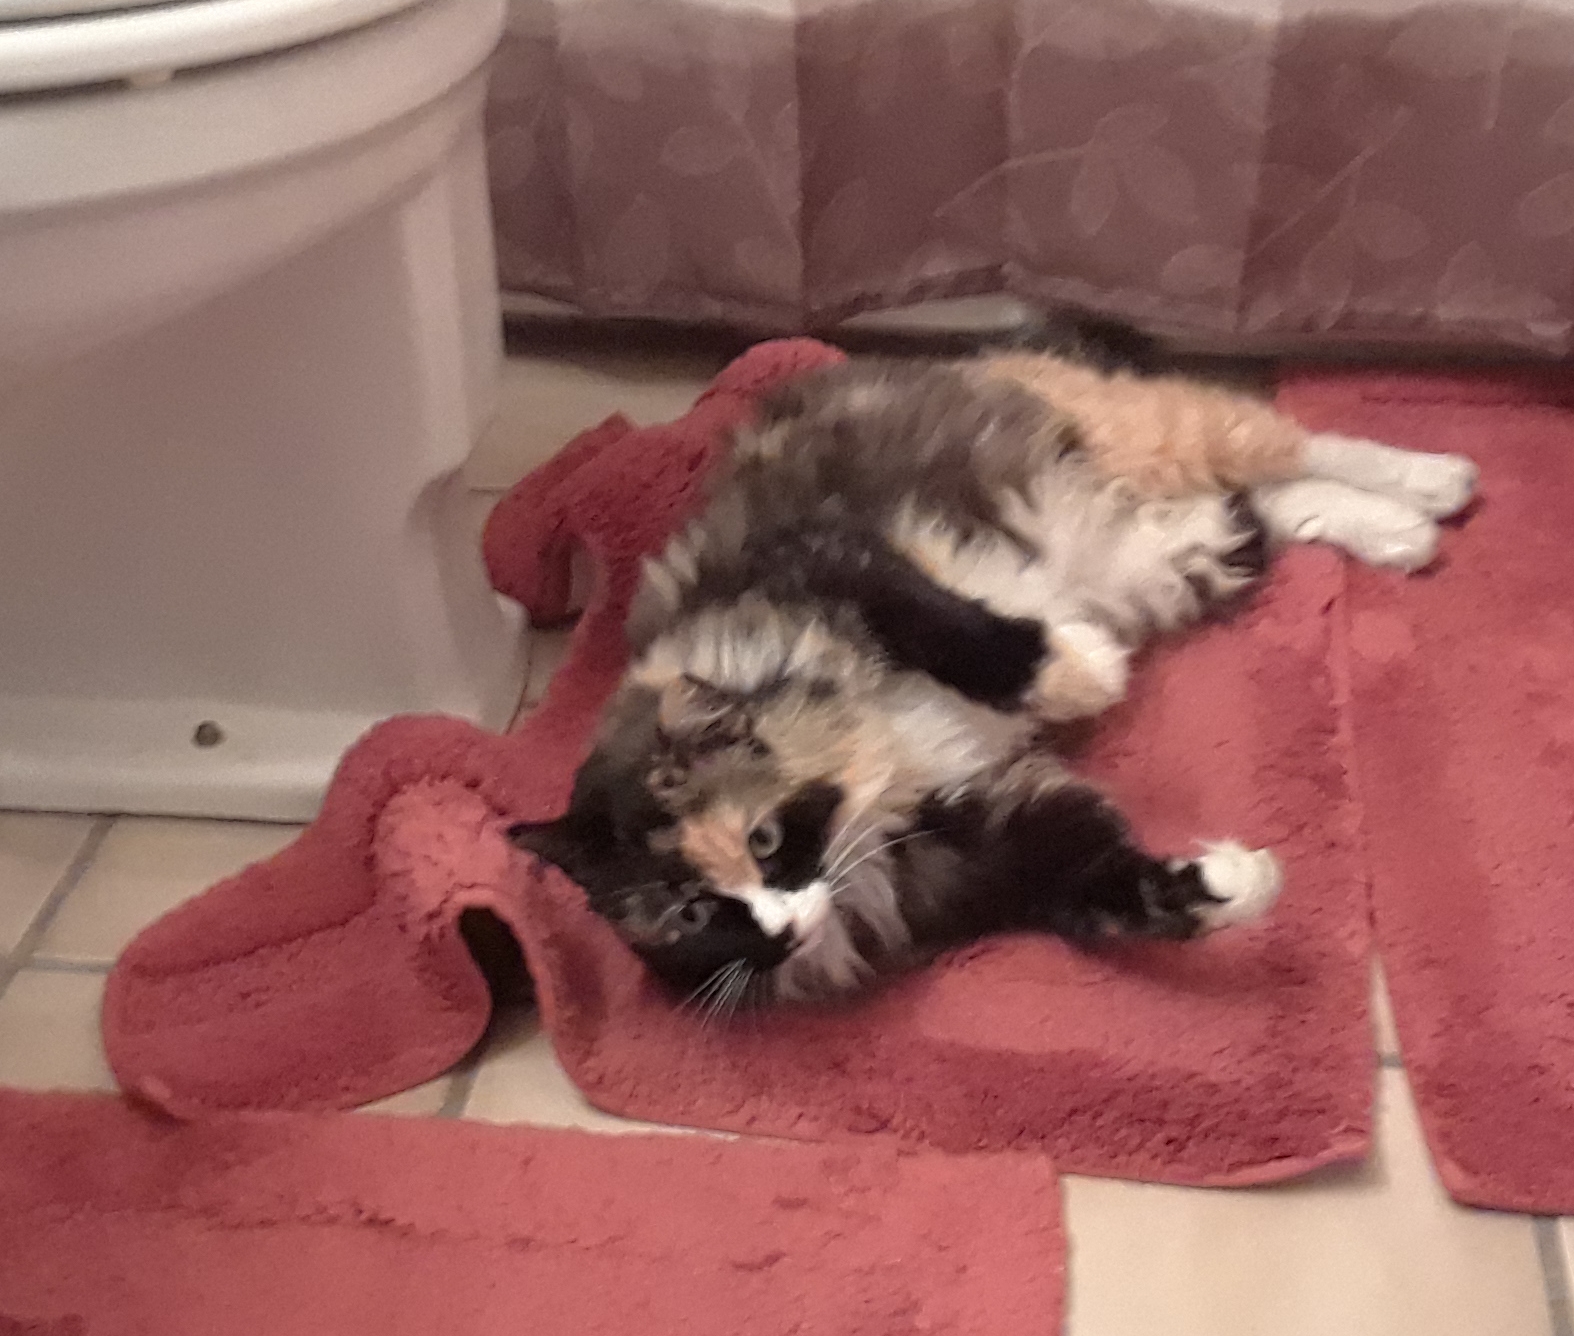 I guess she decided to play with the bathroom rug...